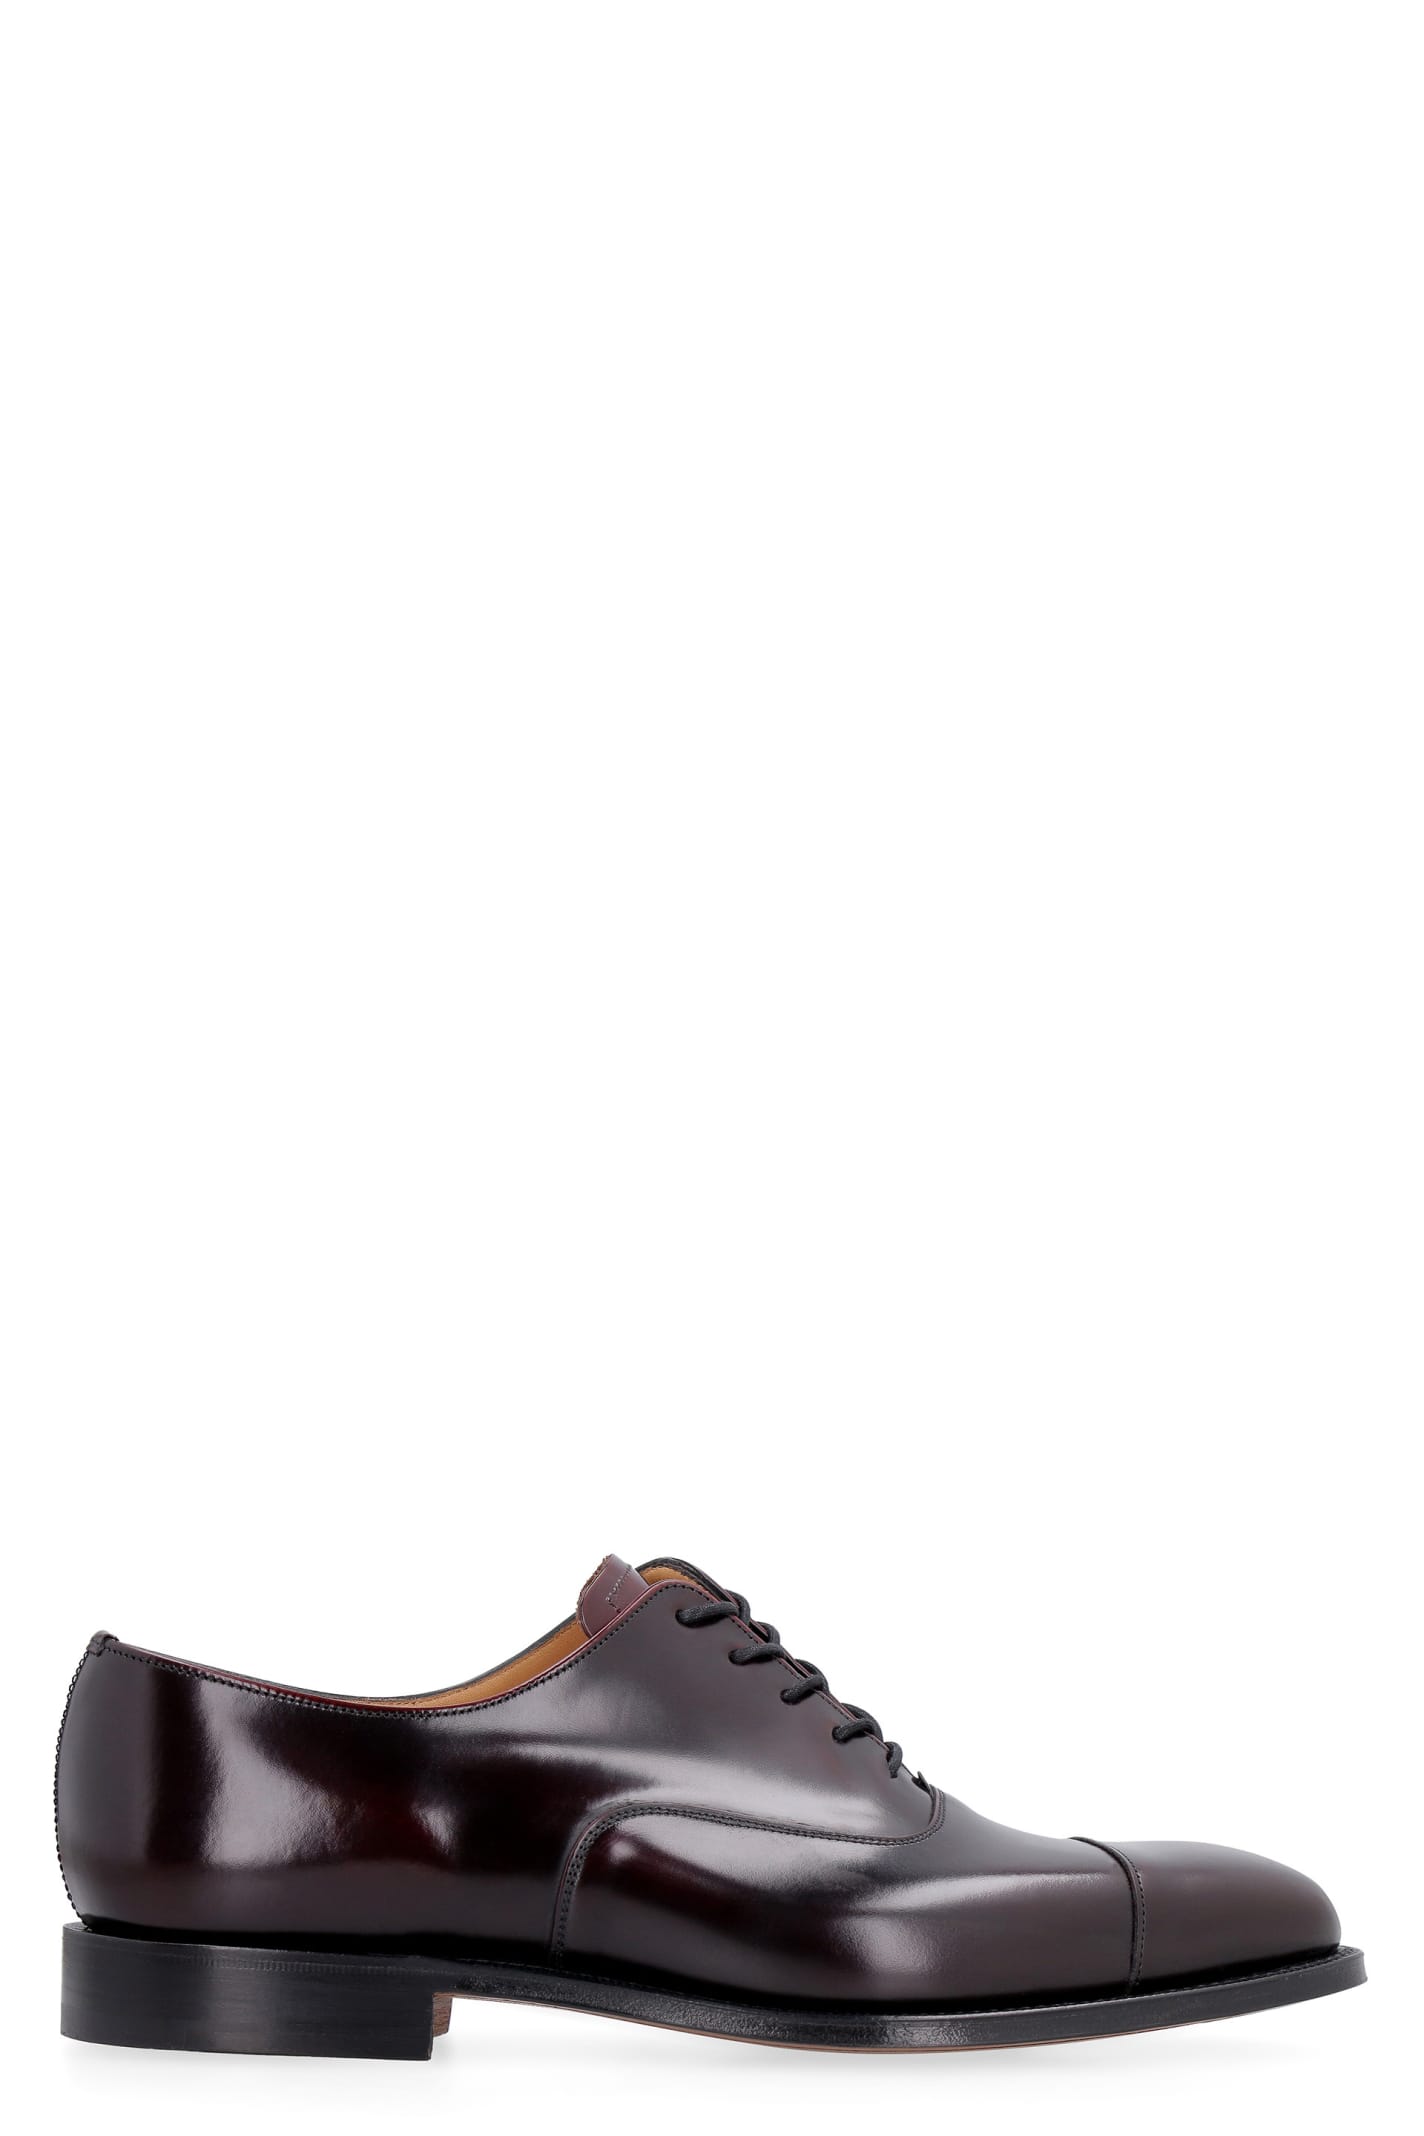 Churchs Falmouth Leather Lace-up Shoes